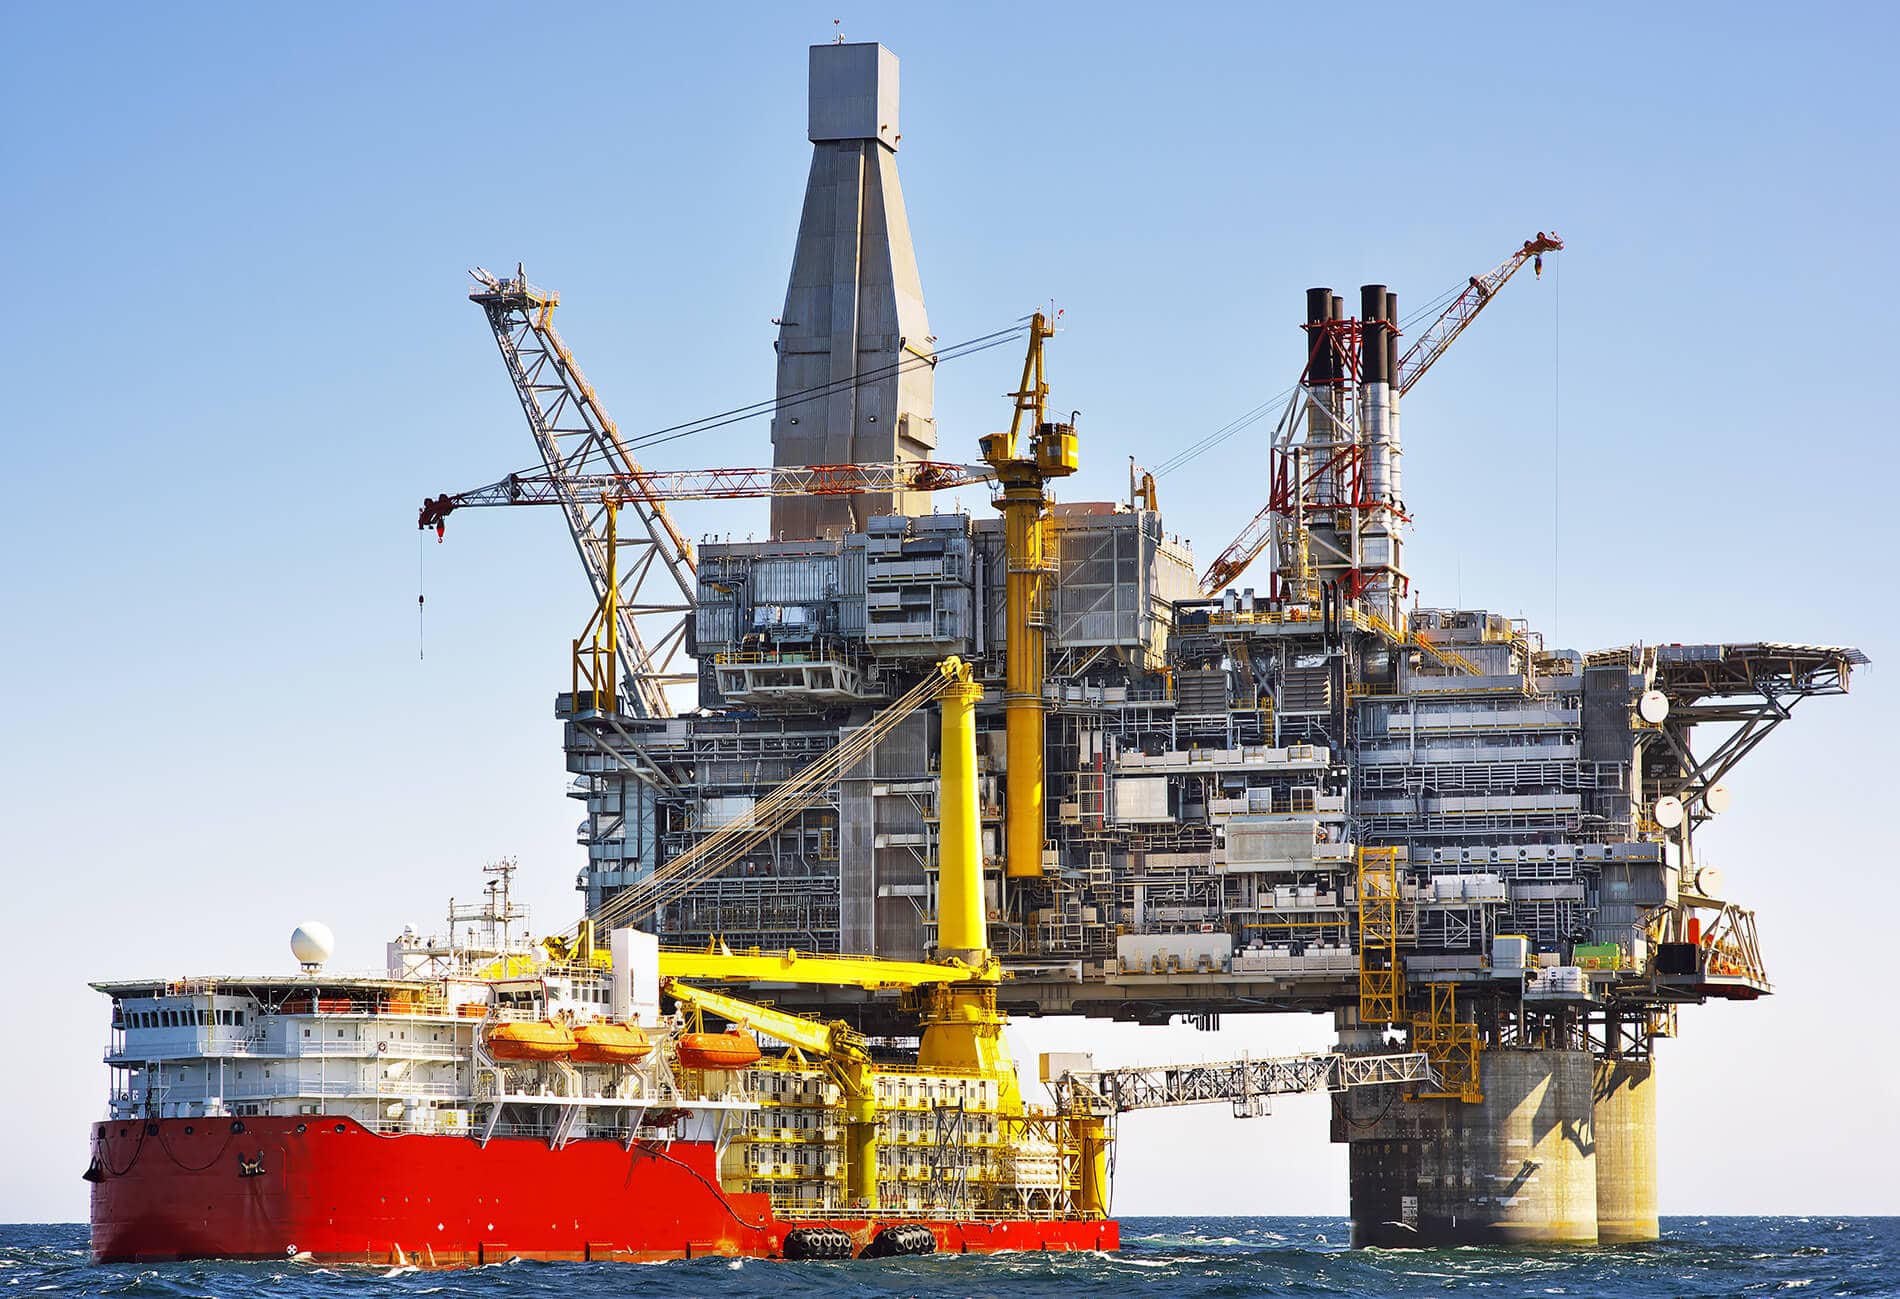 A complex yet beautiful engineering feat of an oil rig in mid-ocean